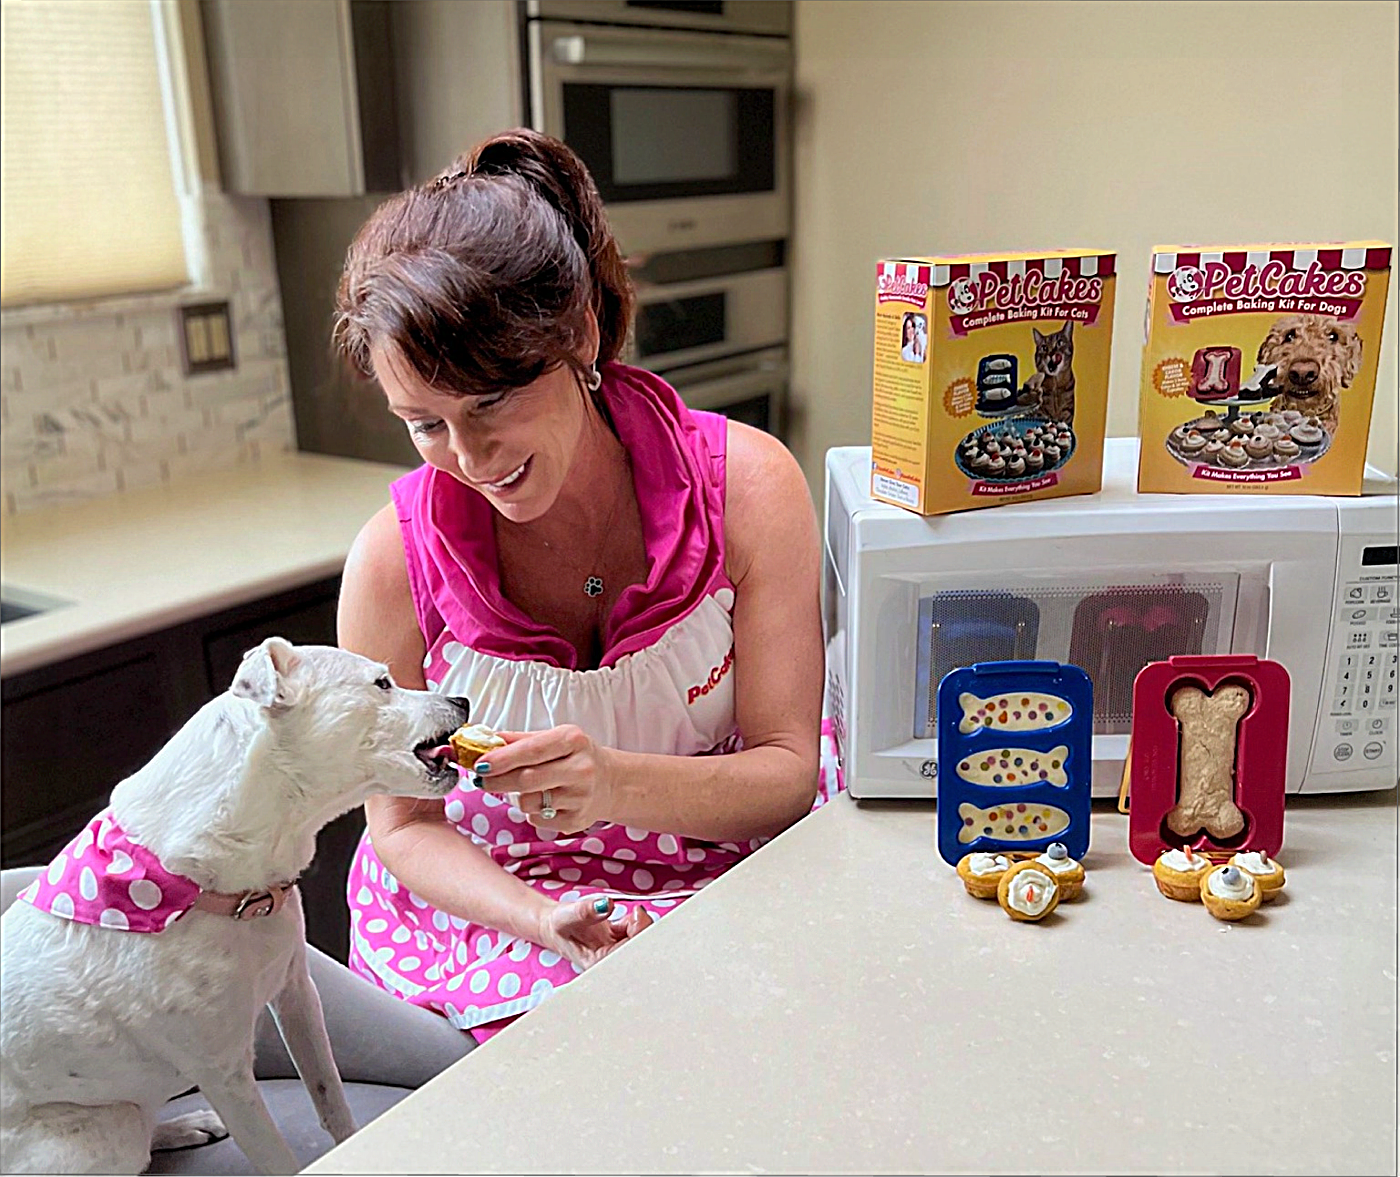 Is Fido a Foodie? Then Say Bone Appetite to This Purrfect Treat - eCommerce Sensation Unveils PetCakes® for Retailers